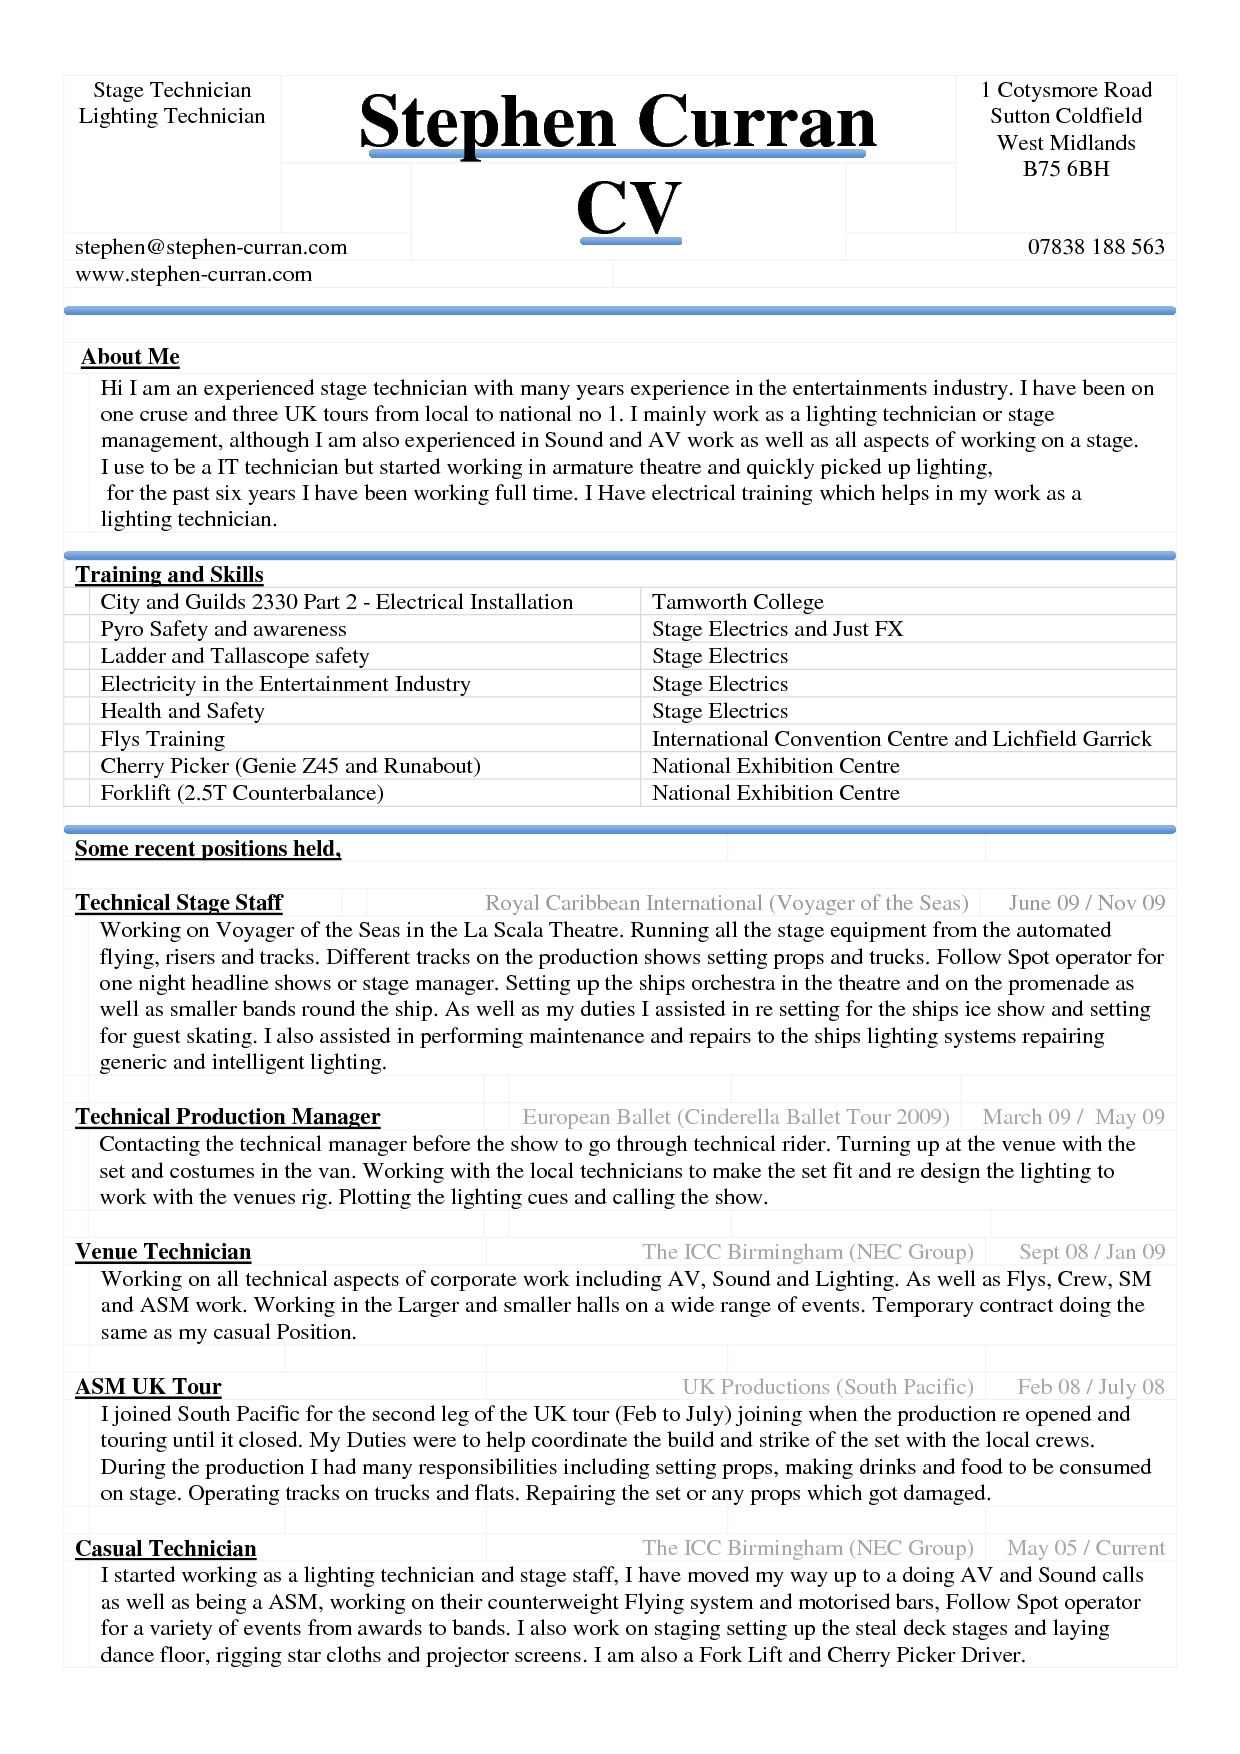 8 Sample Professional Cv Template Microsoft Word Tips | Best Intended For How To Make A Cv Template On Microsoft Word